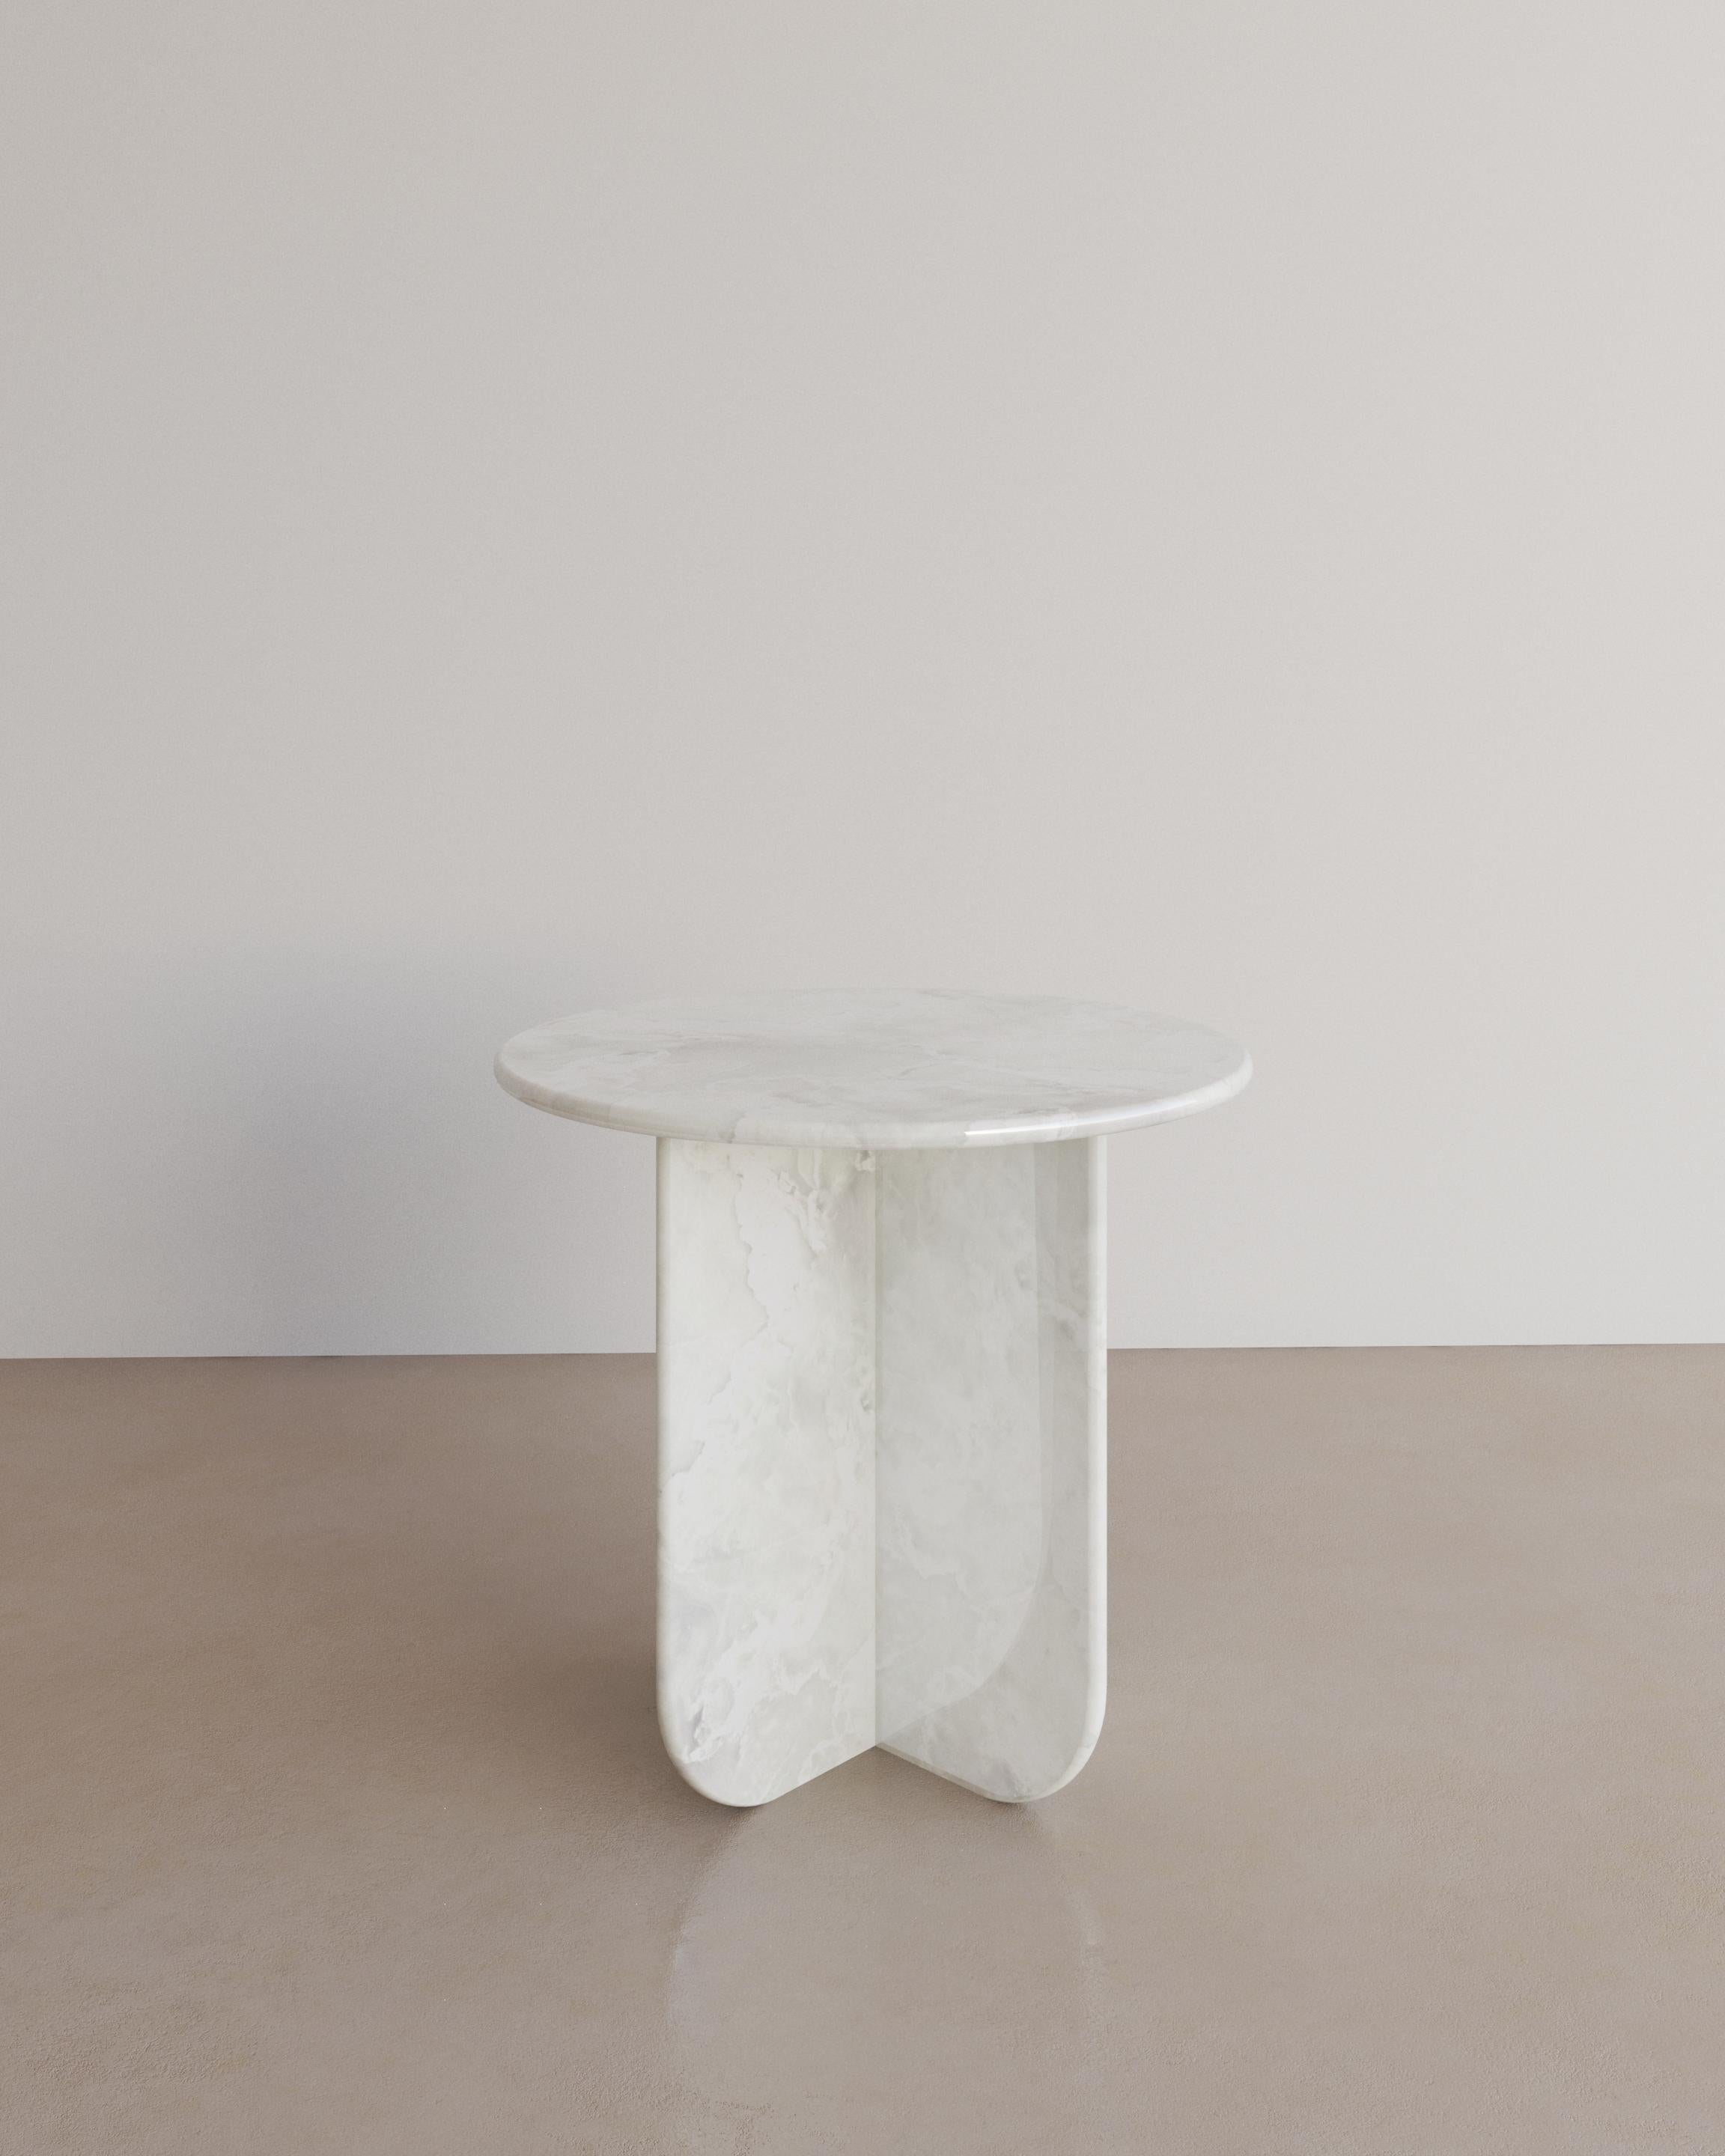 The Essentialist presents the Ètoile Occasional Table in Bianco Onyx. A petite circle elegantly stacks upon a four point star. A bold statement that encapsulates excellence and expertise. Finished with bullnose edge detailing and soft curvature.